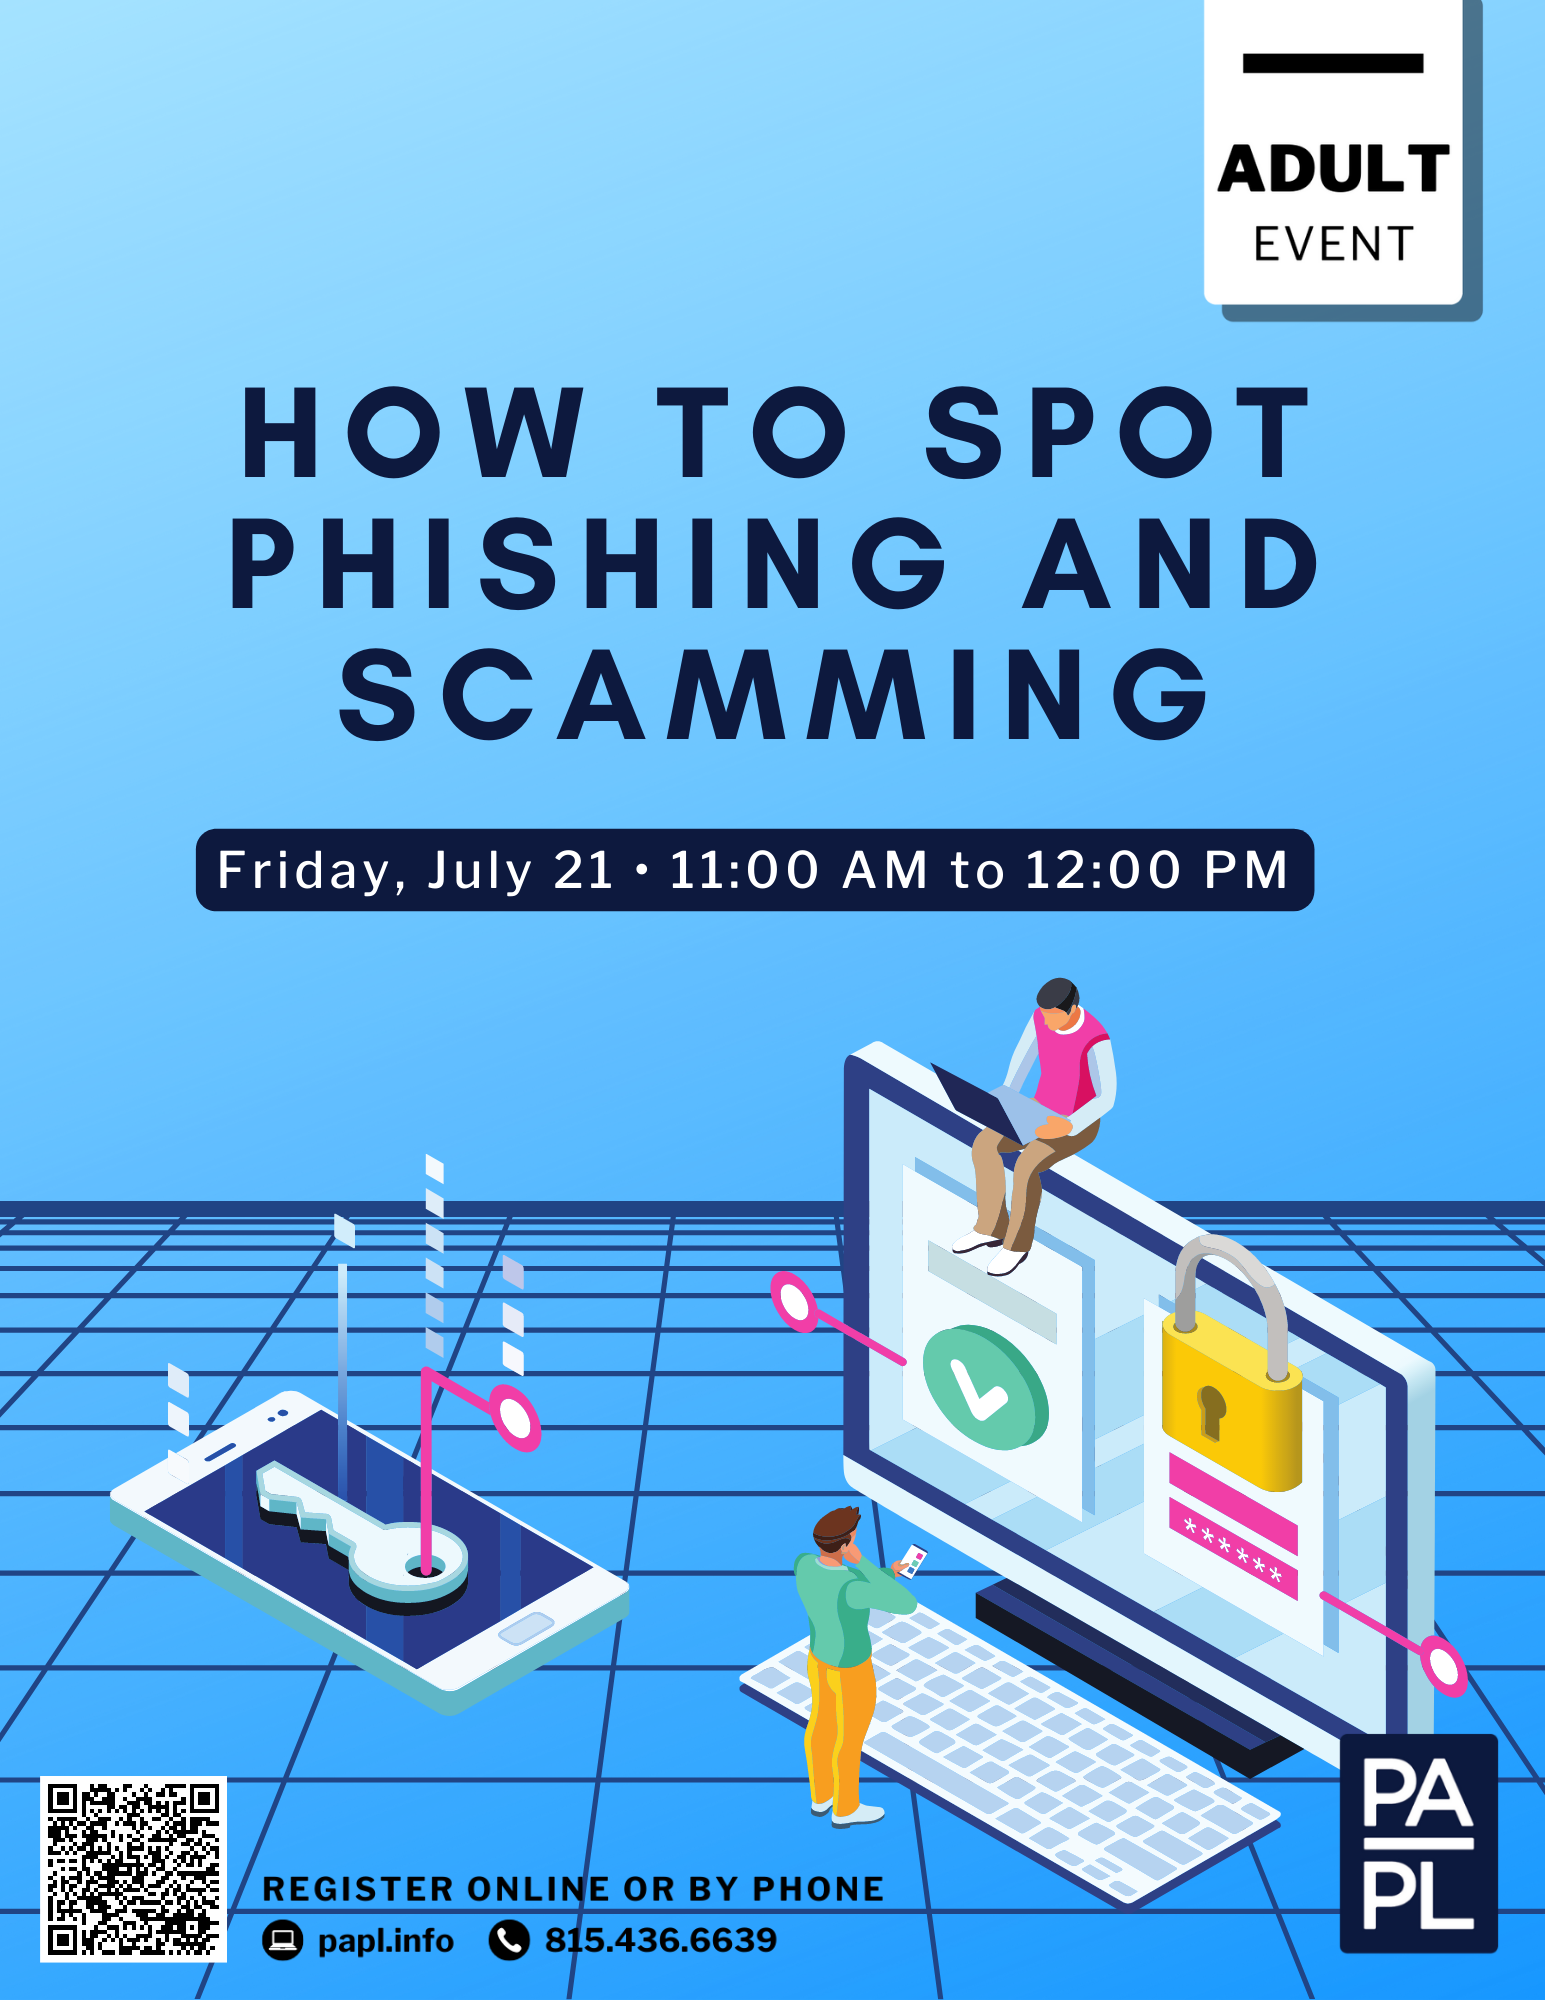 How to Spot Phishing and Scamming